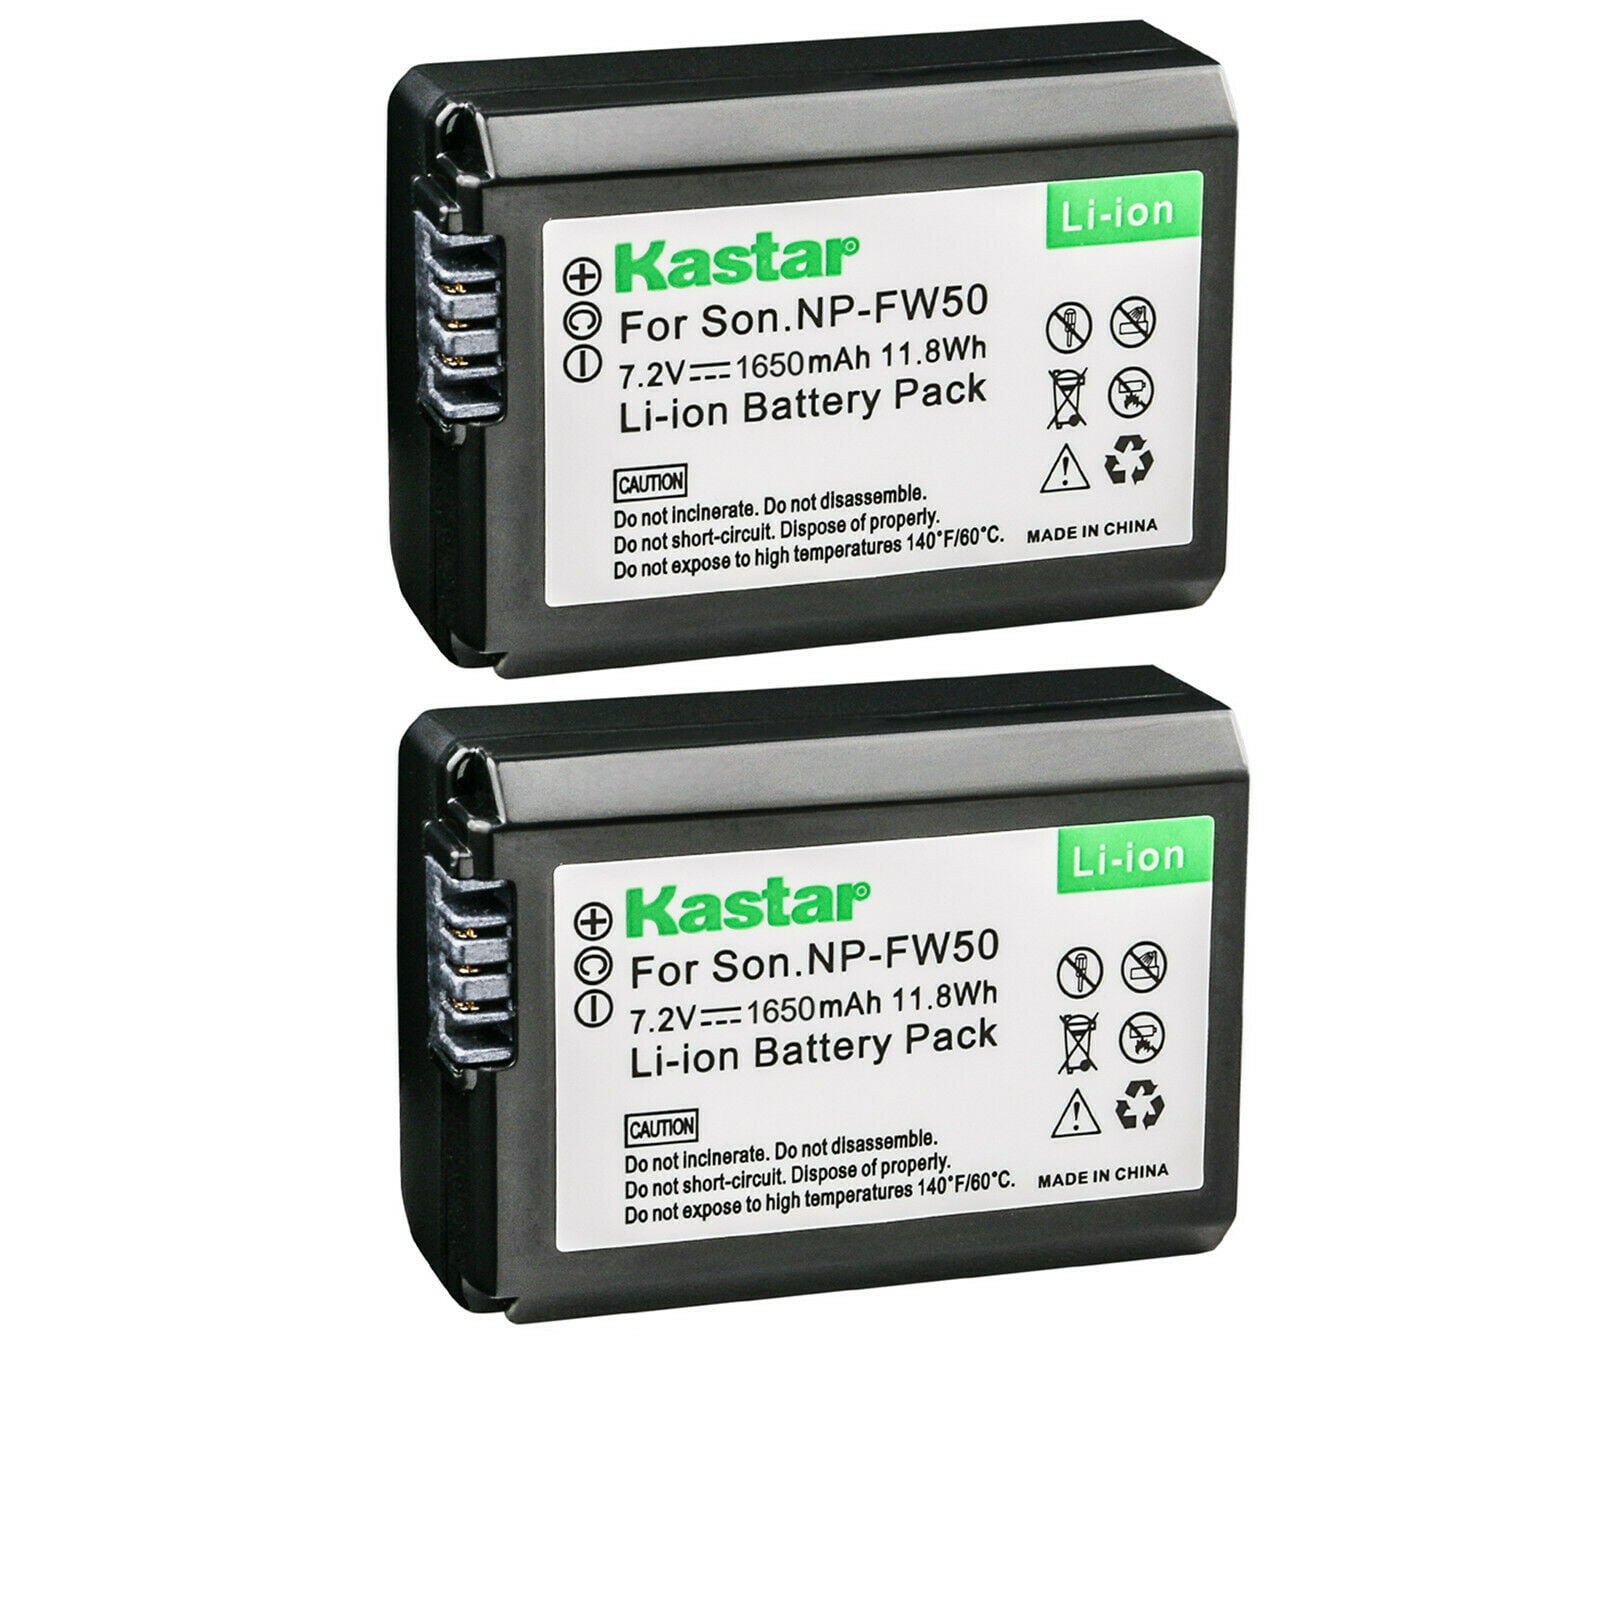 Kastar 2-Pack NP-FW50 Battery Replacement for Sony Cyber-shot DSC